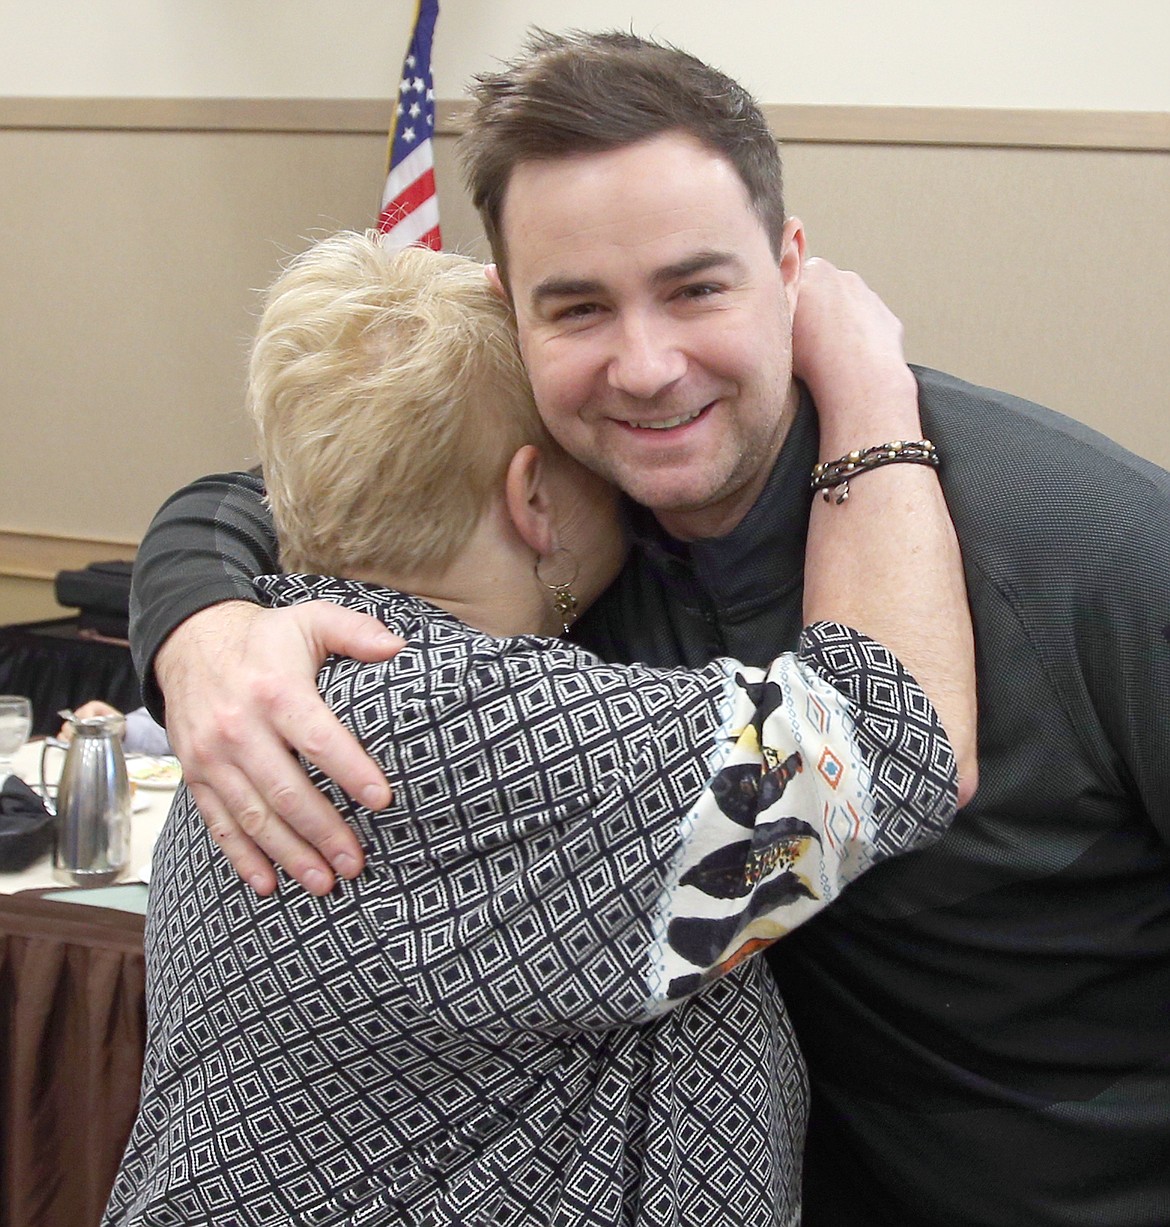 Mick O'Neill, Best Western Plus Coeur d'Alene Inn banquet manager, gets a hug from Earlee Young, Rambling Rovers president, on Thursday.